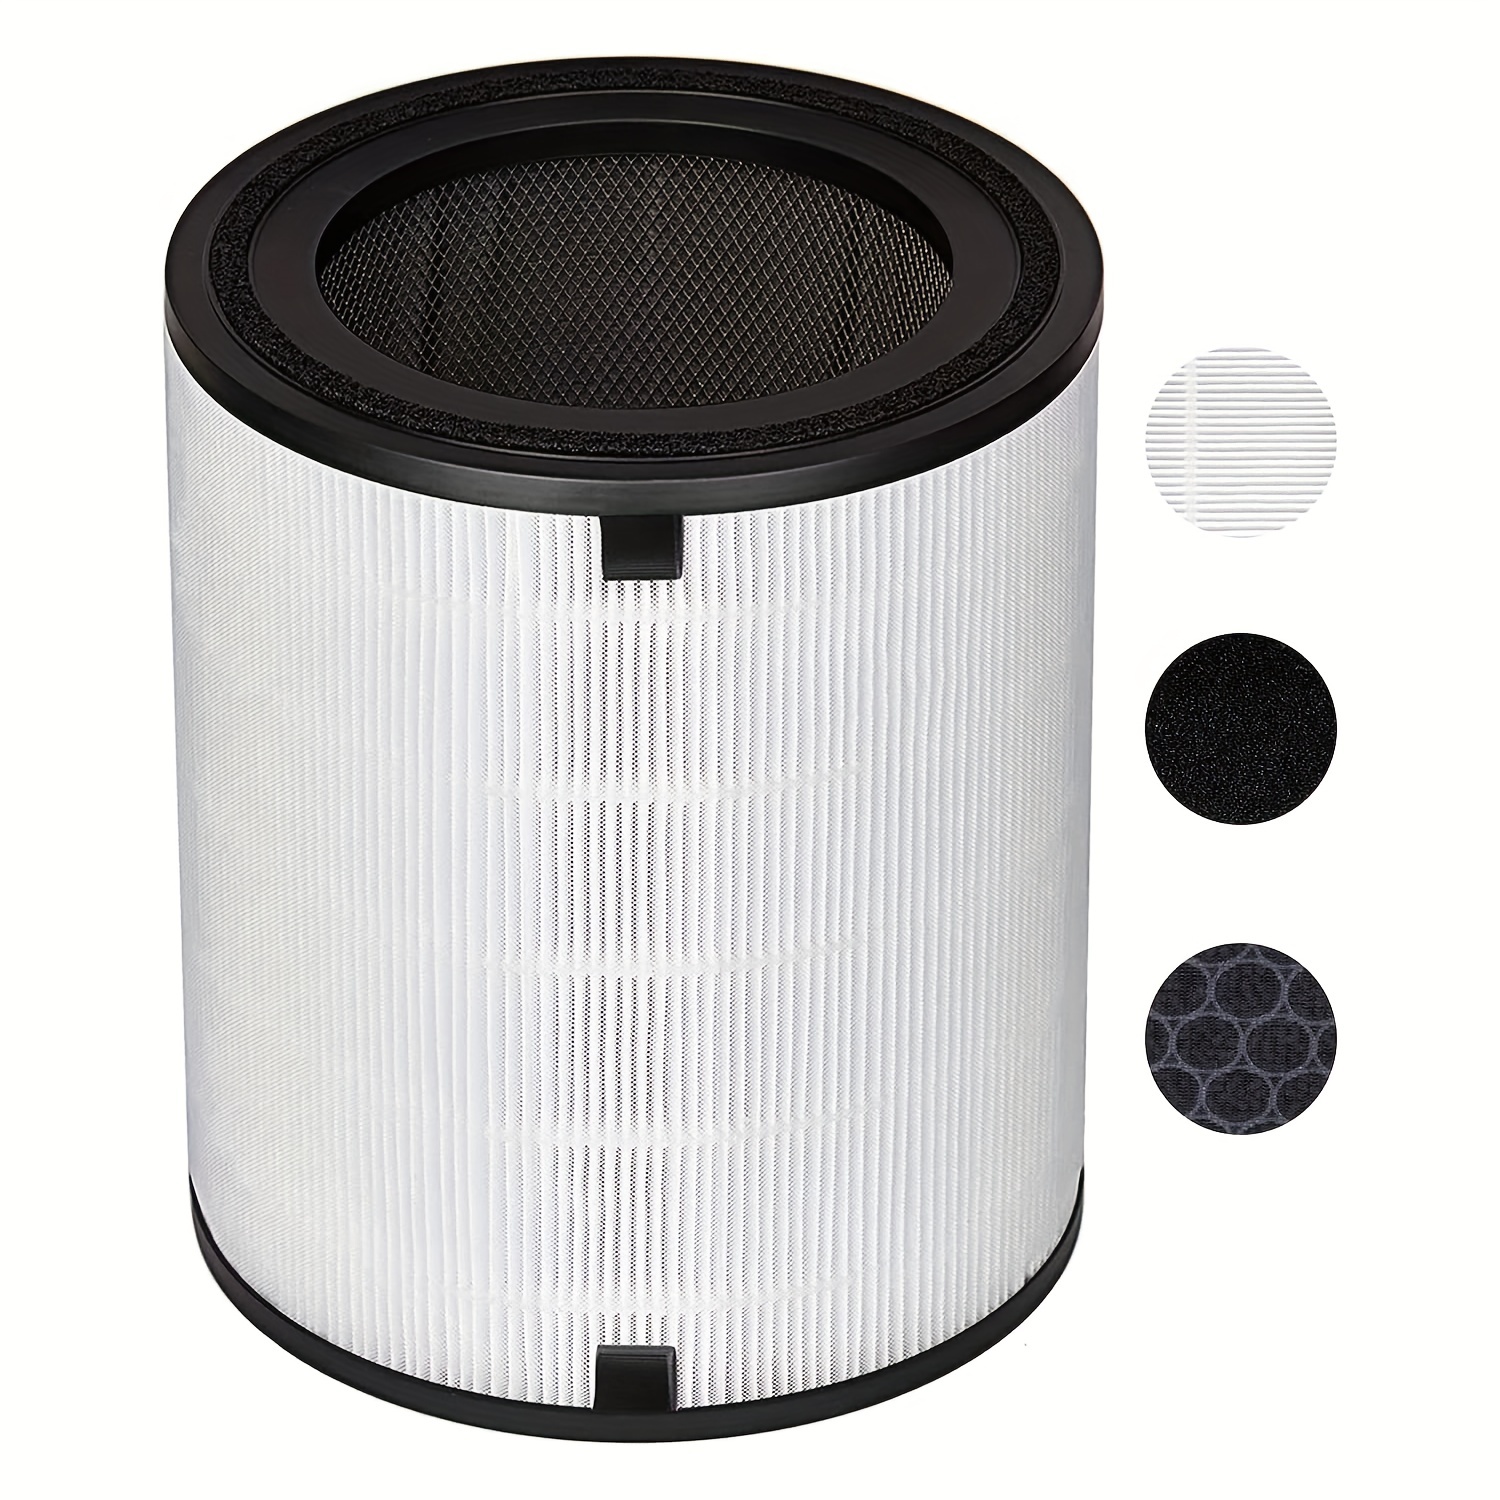  LV-H132 Replacement Filter Compatible for LEVOIT LV-H132 Air  Puifier, 3-in-1 Pre, H13 True HEPA, Activated Carbon Filtration System,  Replace Part LV-H132-RF, Pack of 2 : Automotive